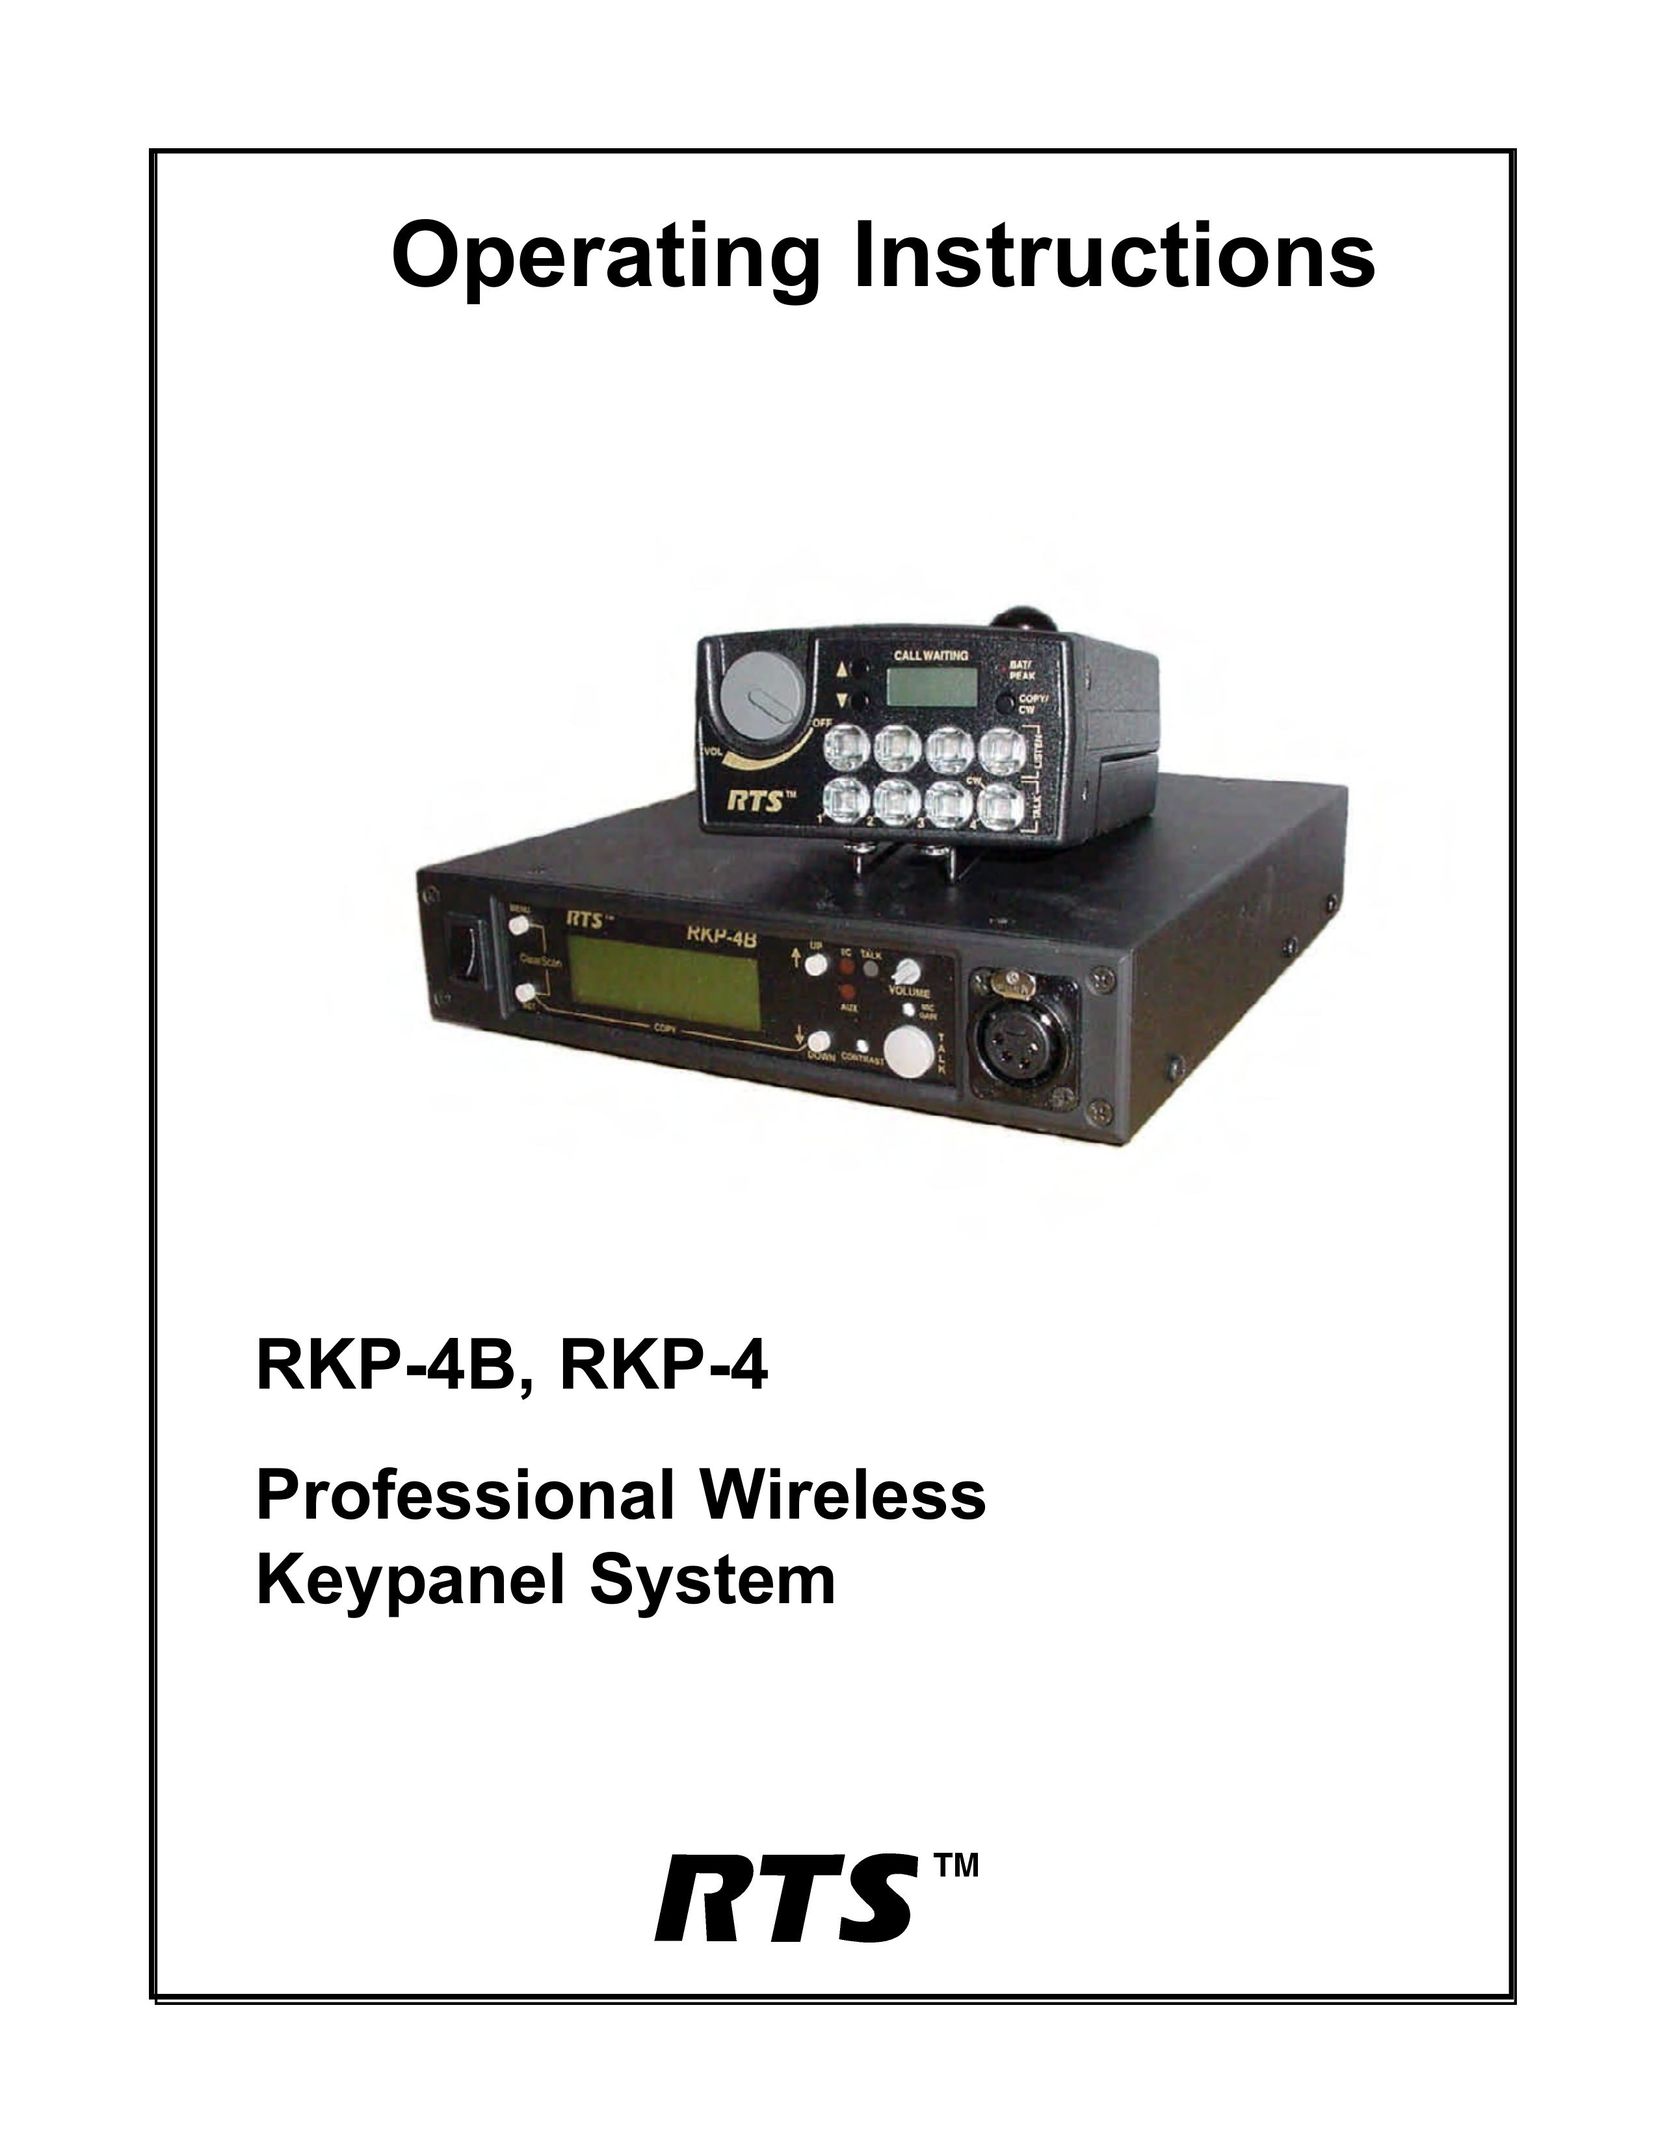 RTS RKP-4B Stereo Receiver User Manual